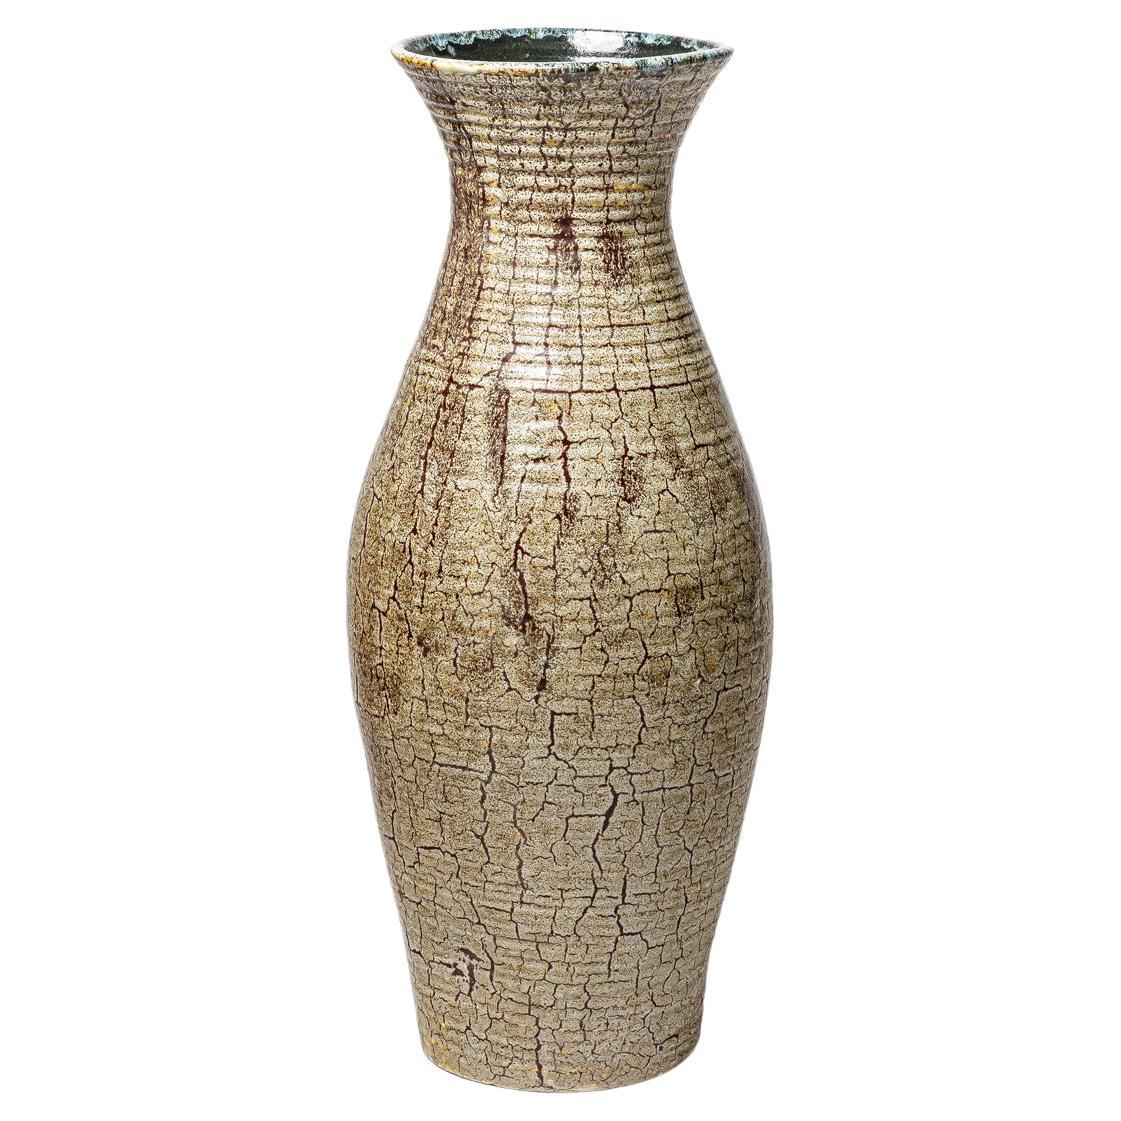  Brown glazed stoneware vase by Accolay, circa 1960-1970. For Sale